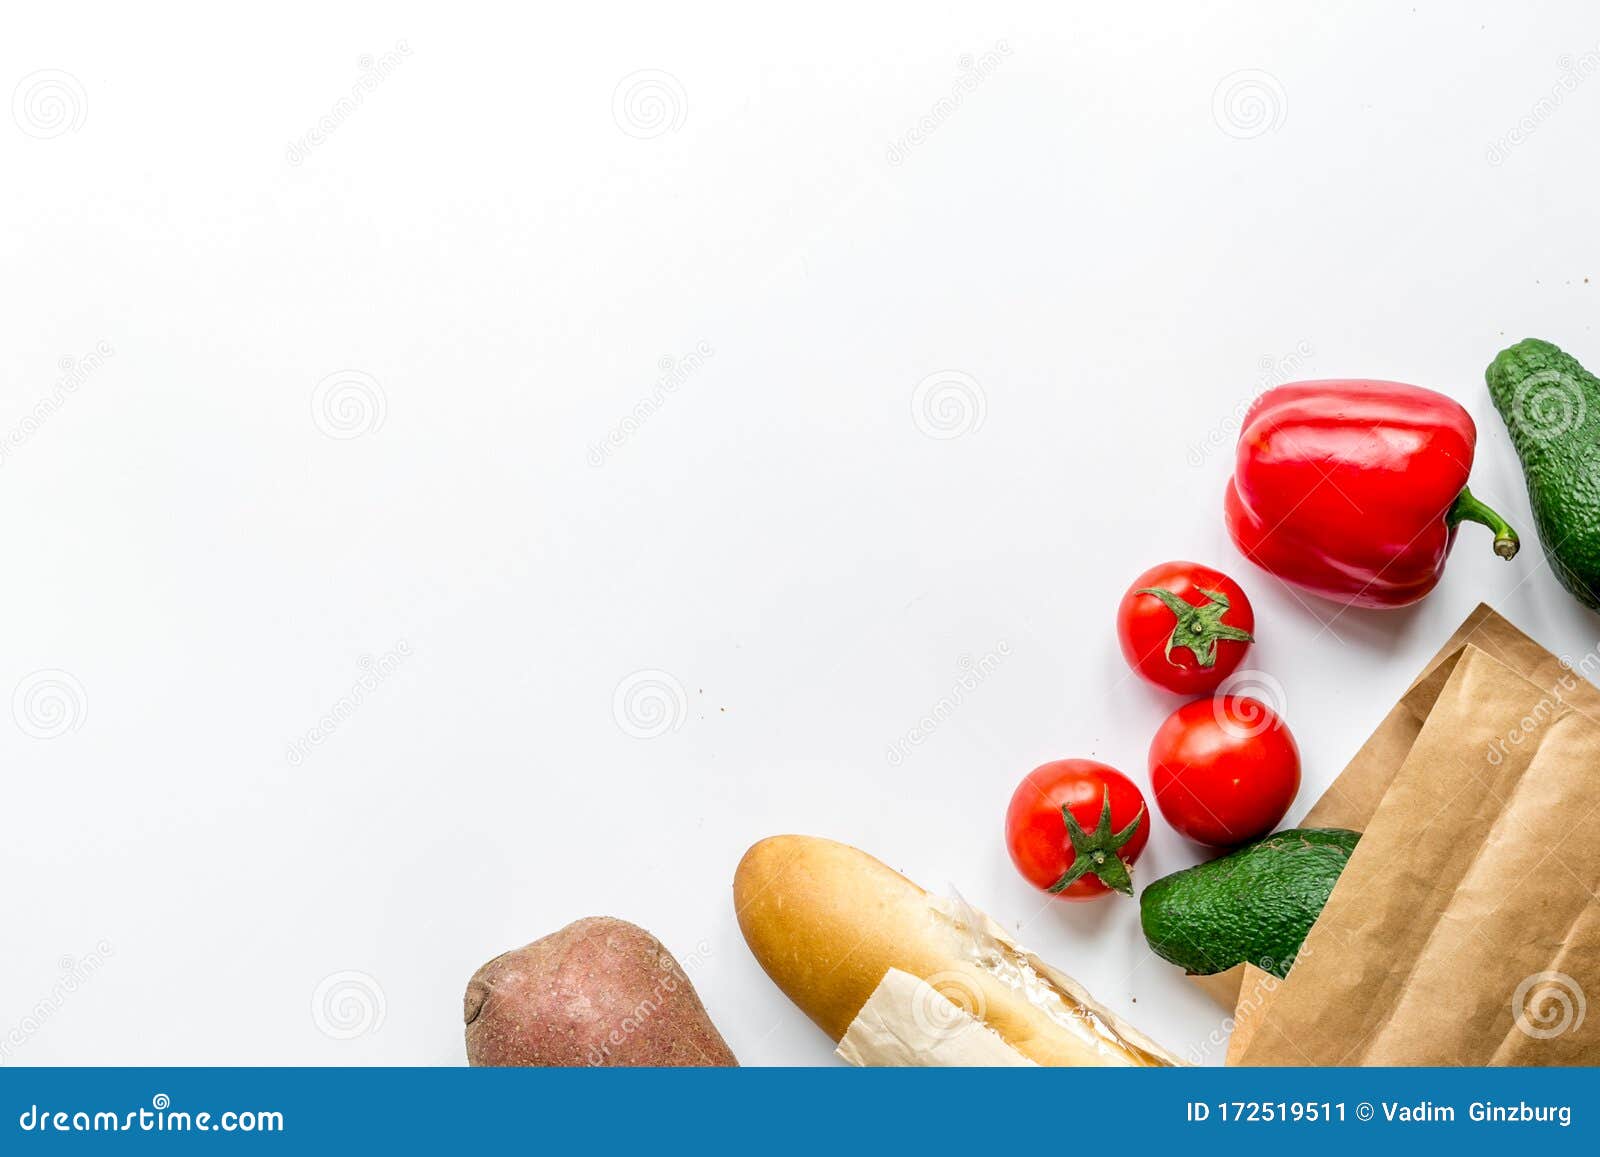 Store Concept With Vegetables And Paper Bag Table Background Top View Mockup Stock Image Image Of Pepper Bread 172519511